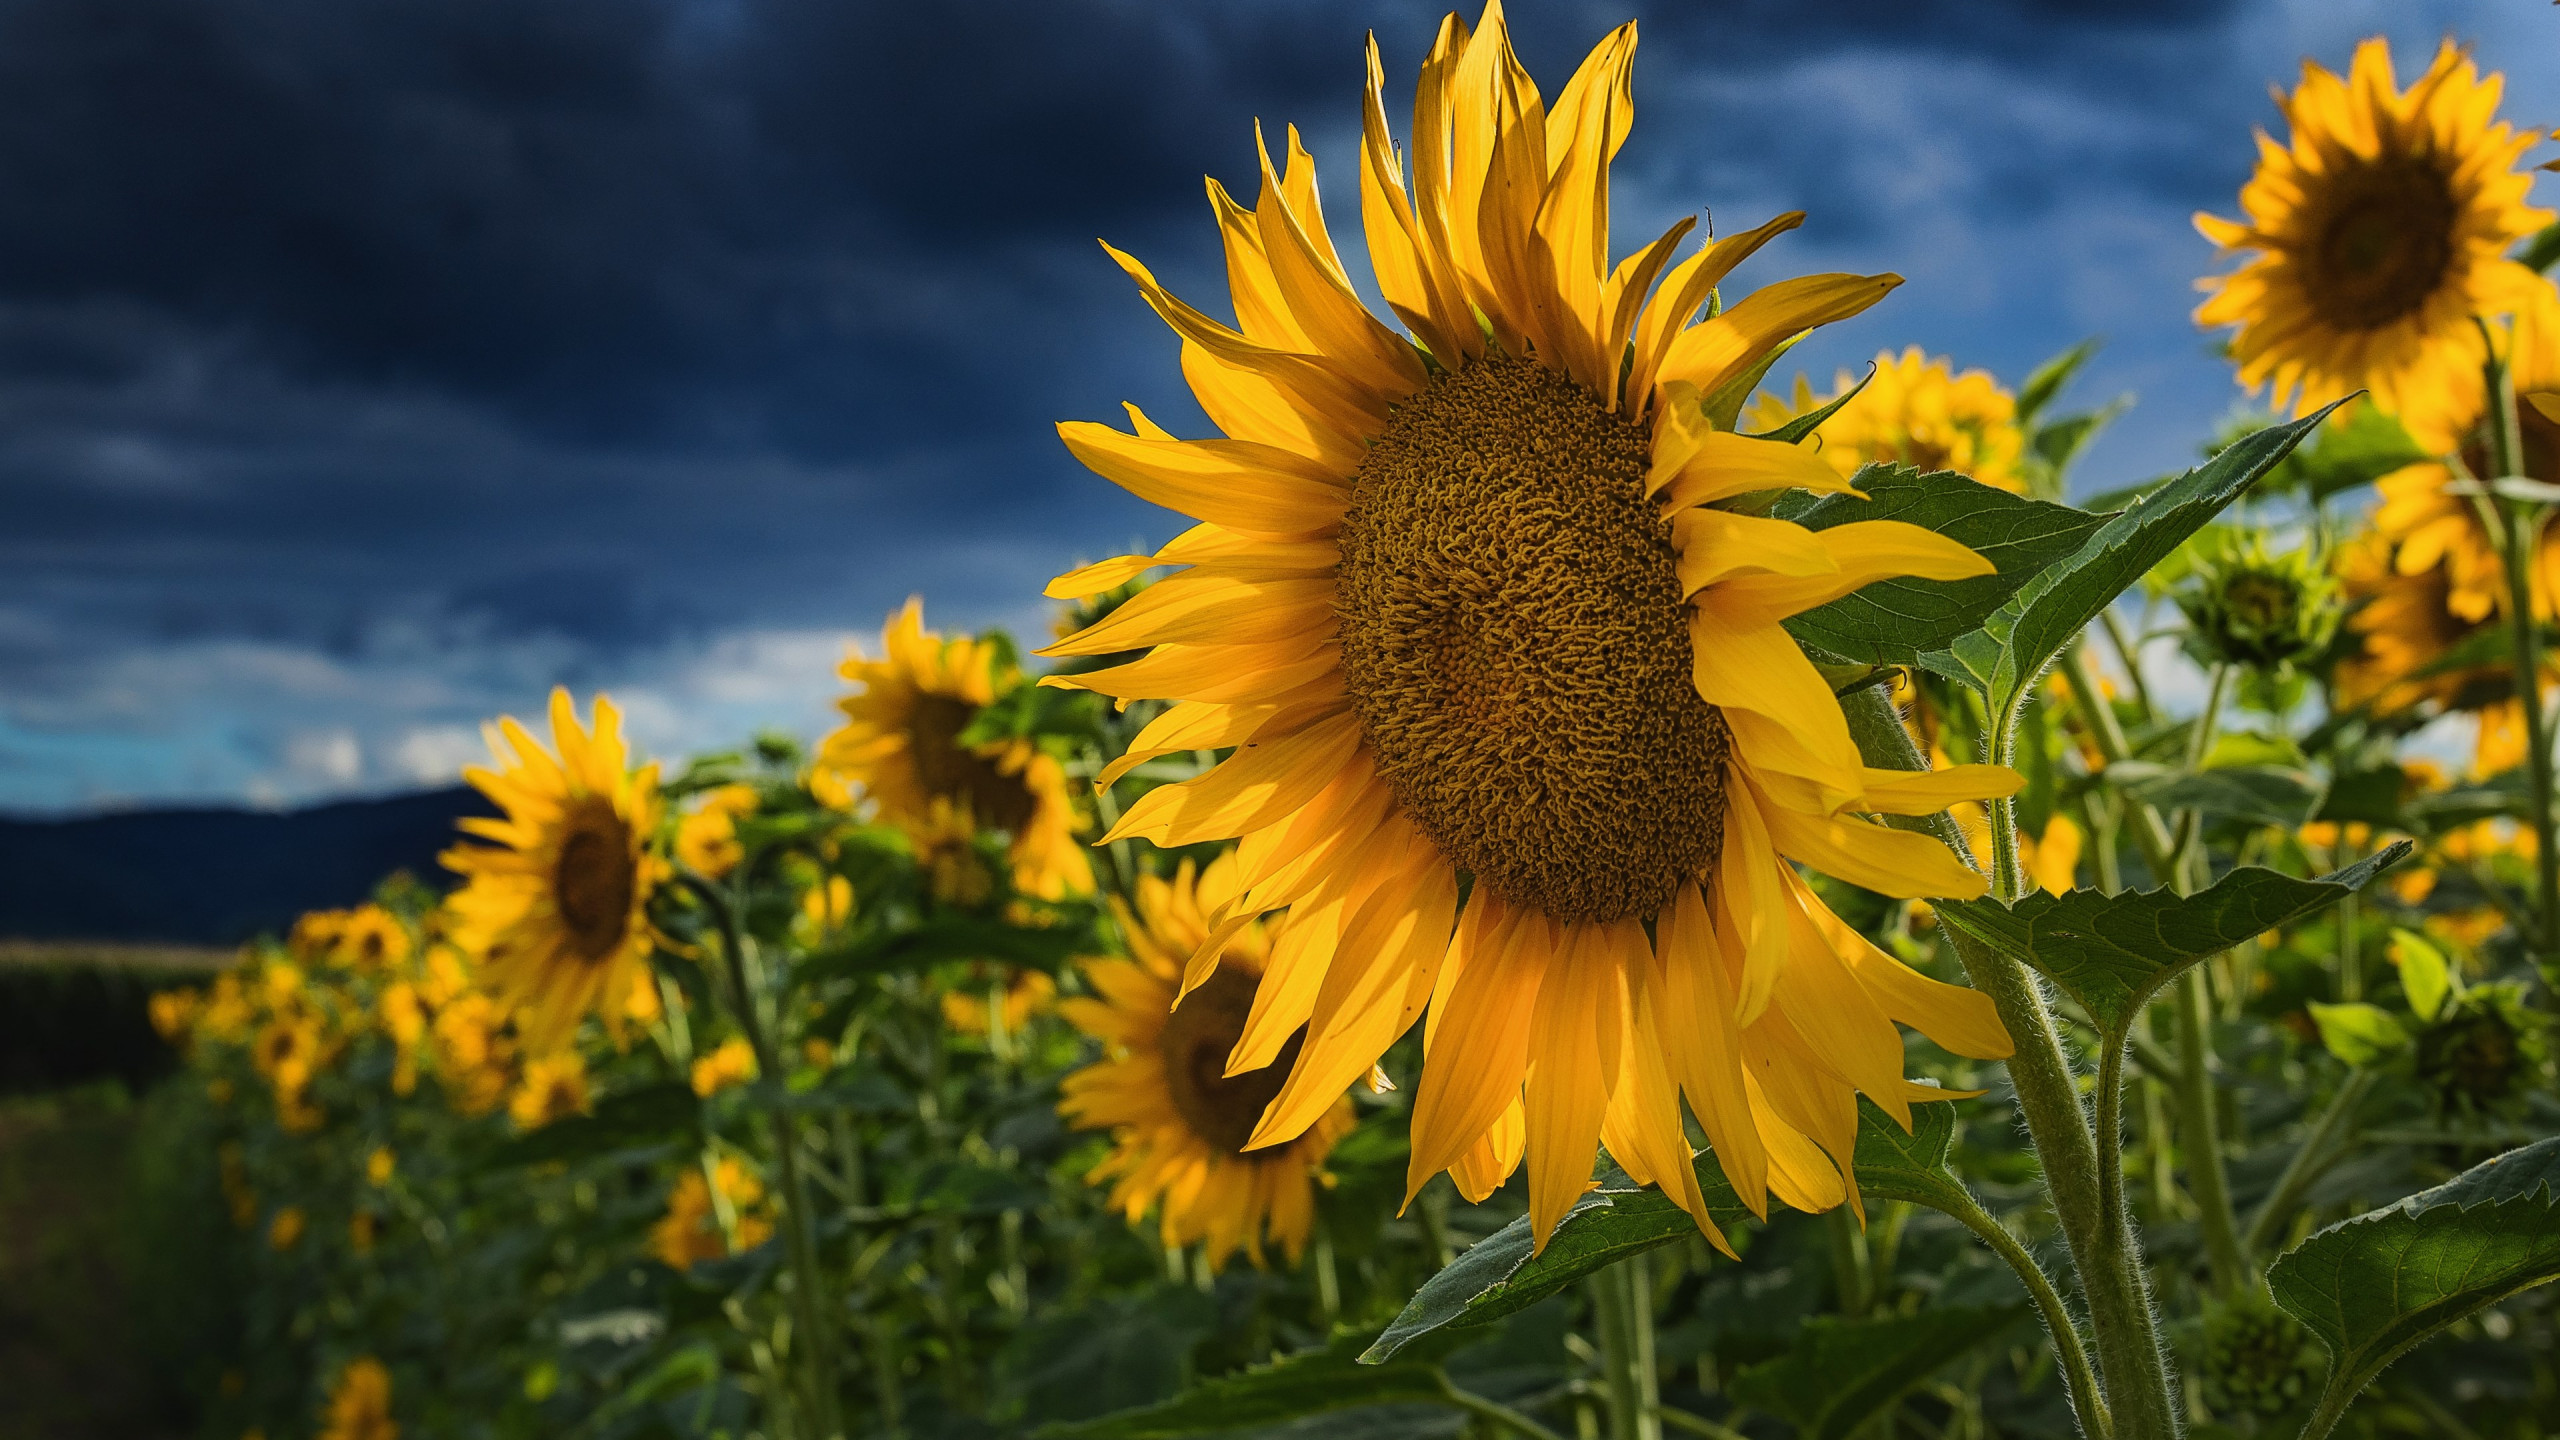 Download wallpaper: Blooming sunflowers 2560x1440